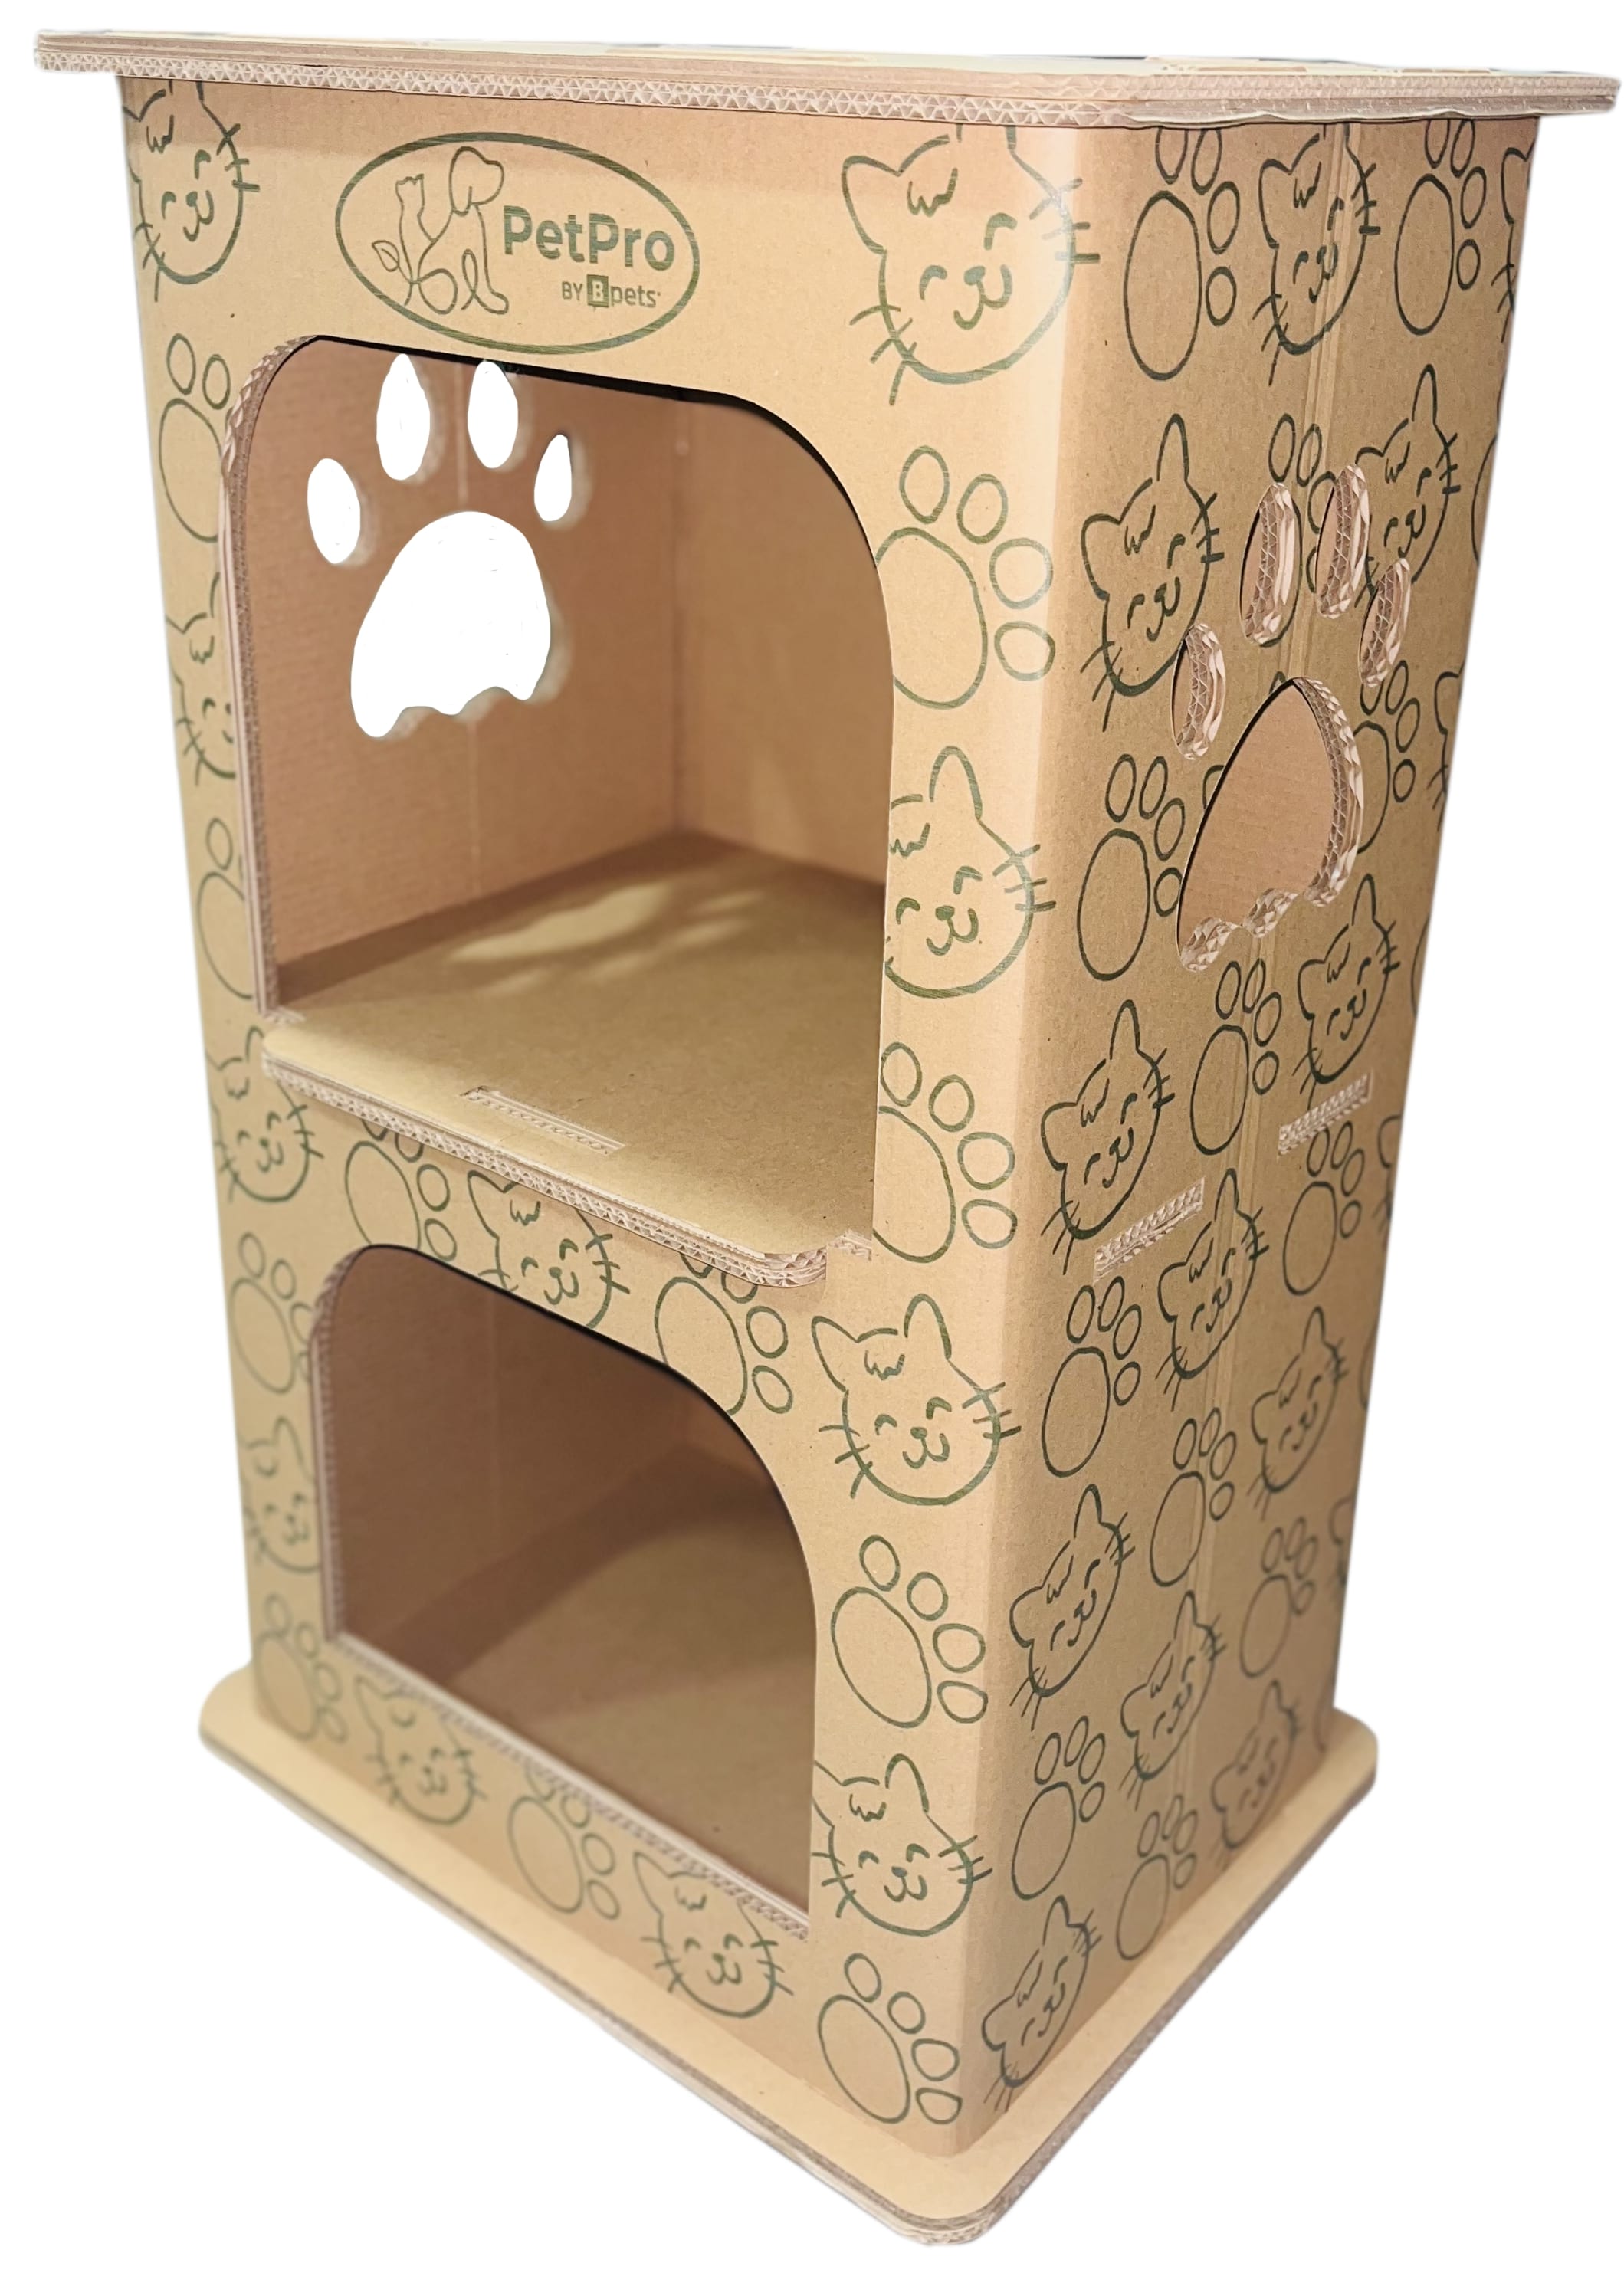 PetPro 2-Floor Pet House, Cat House, Small Animal Hideaway, Eco-Friendly Play House, Corrugated Cardboard Cat Condo, Rabbit Hutch Alternative, Easy Assembly, Durable & Spacious